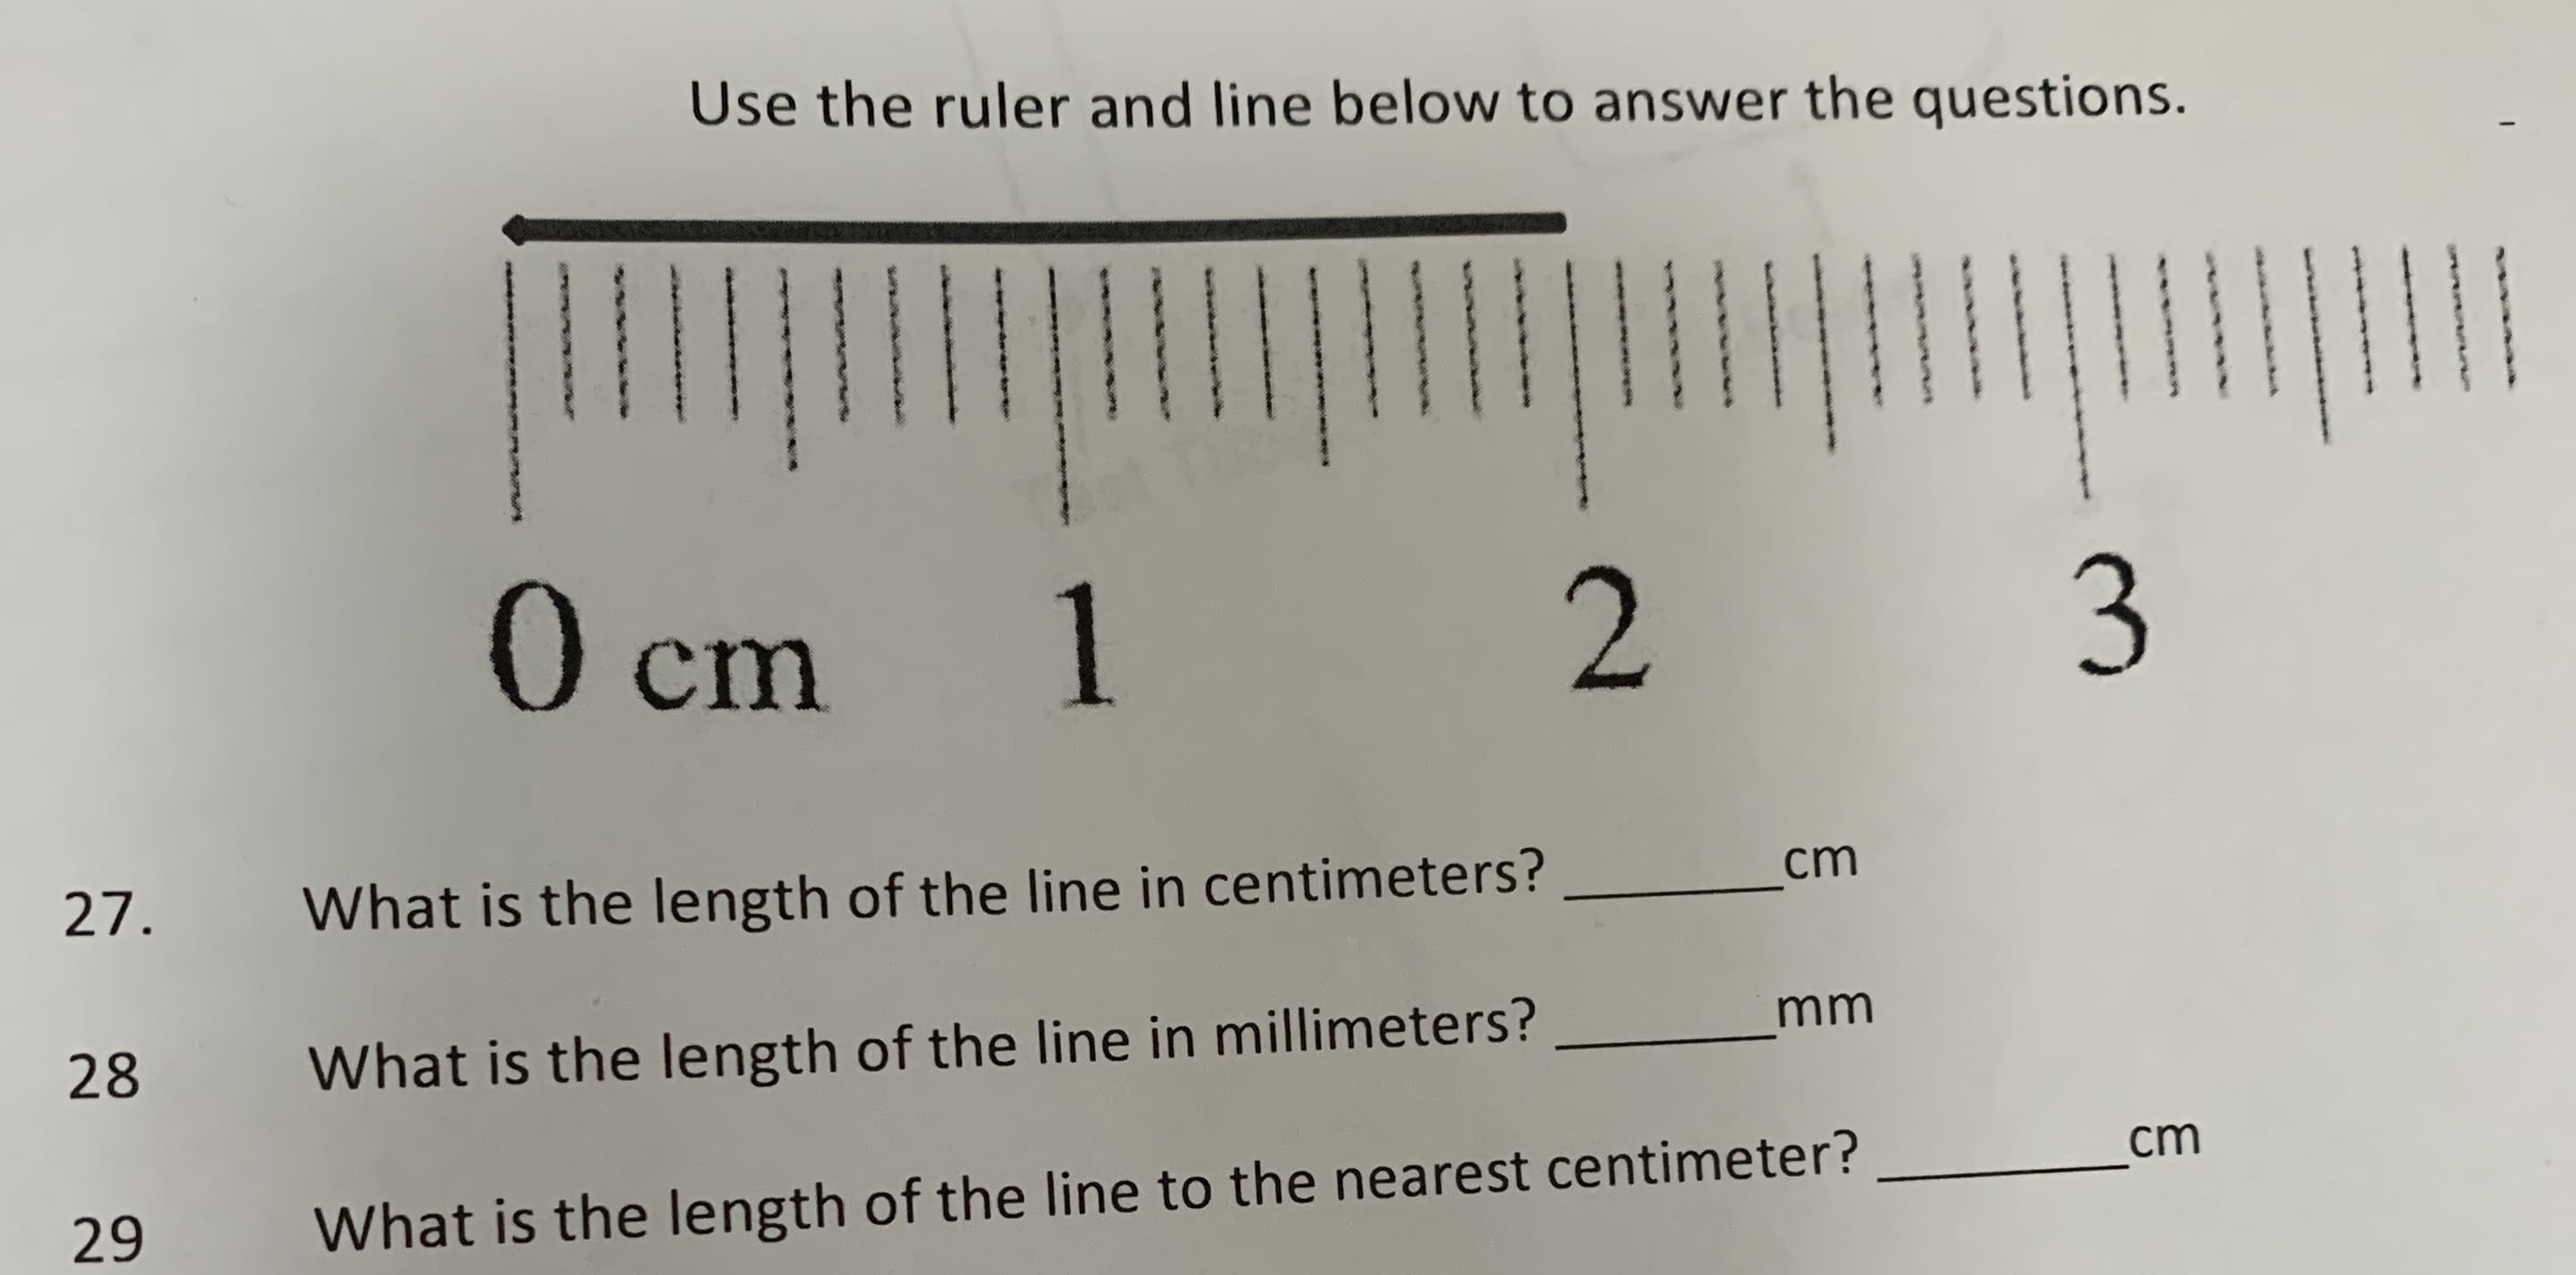 Use the ruler and line below to answer the questions.
O cm
1
2.
3
27.
What is the length of the line in centimeters?
cm
mm
28
What is the length of the line in millimeters?
cm
29
What is the length of the line to the nearest centimeter?
